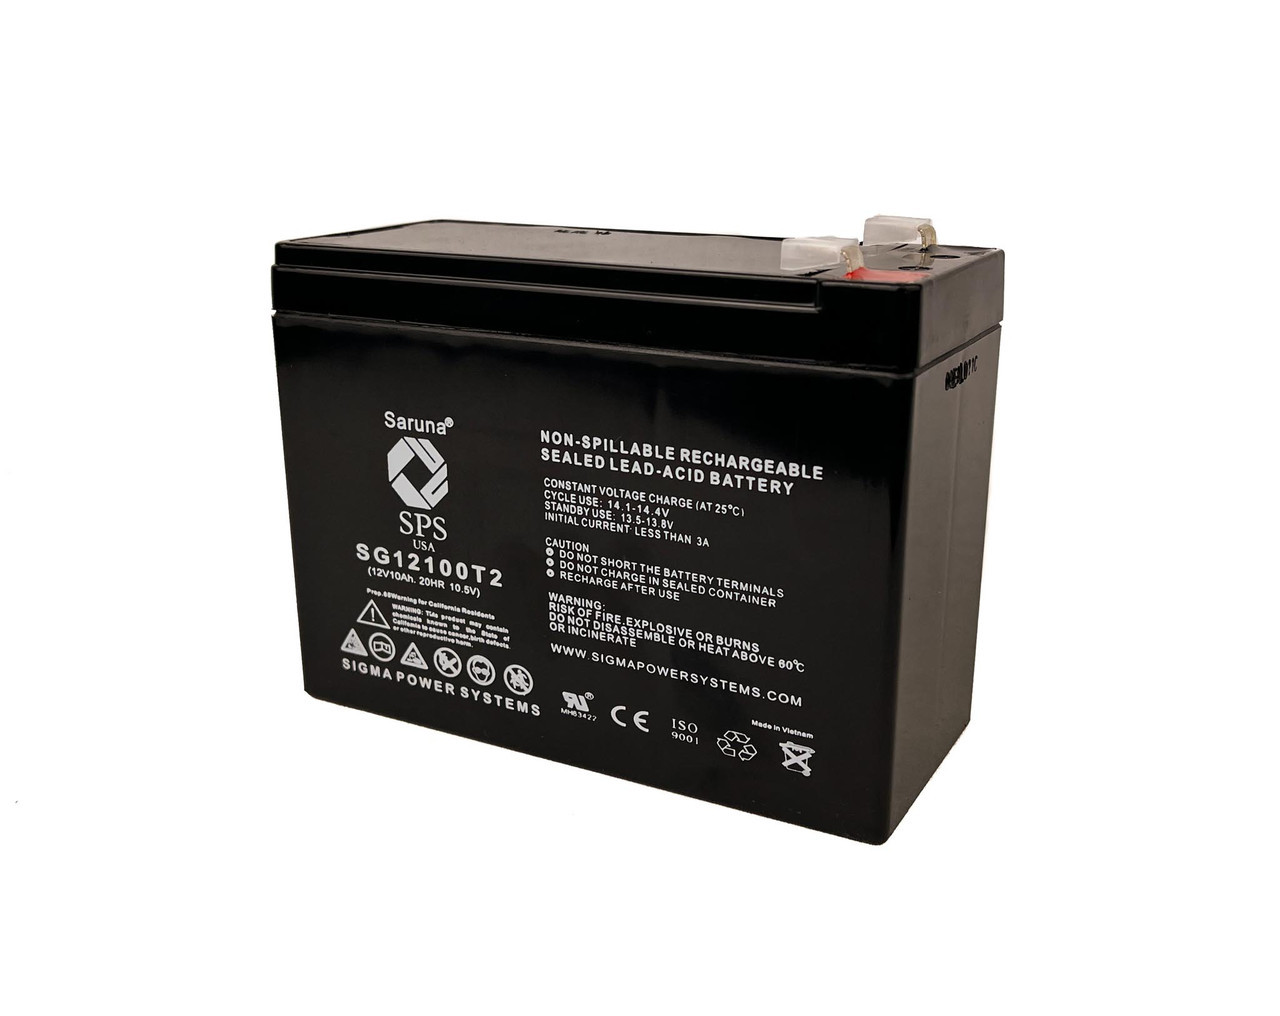 Raion Power 12V 10Ah Non-Spillable Replacement Rechargebale Battery for Weida HX12-10A